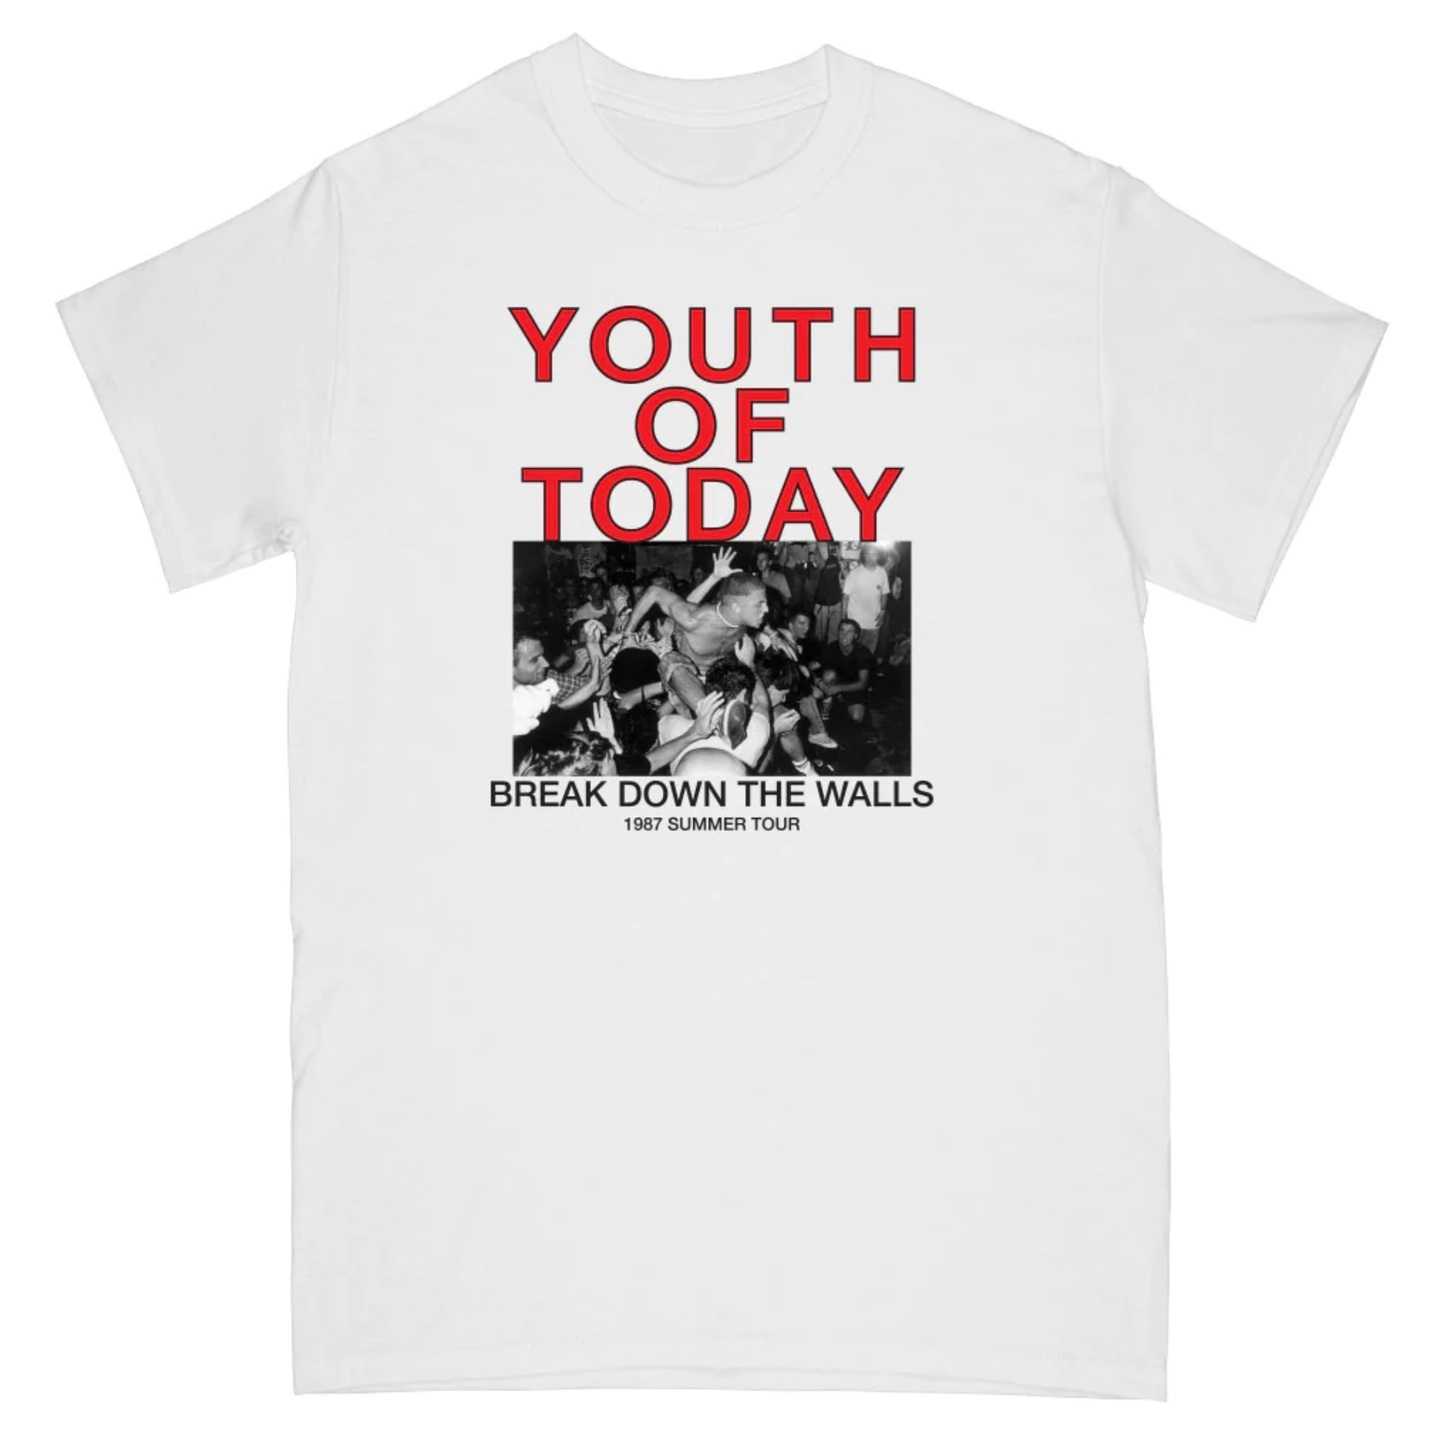 YOUTH OF TODAY - 1987 Summer Tour